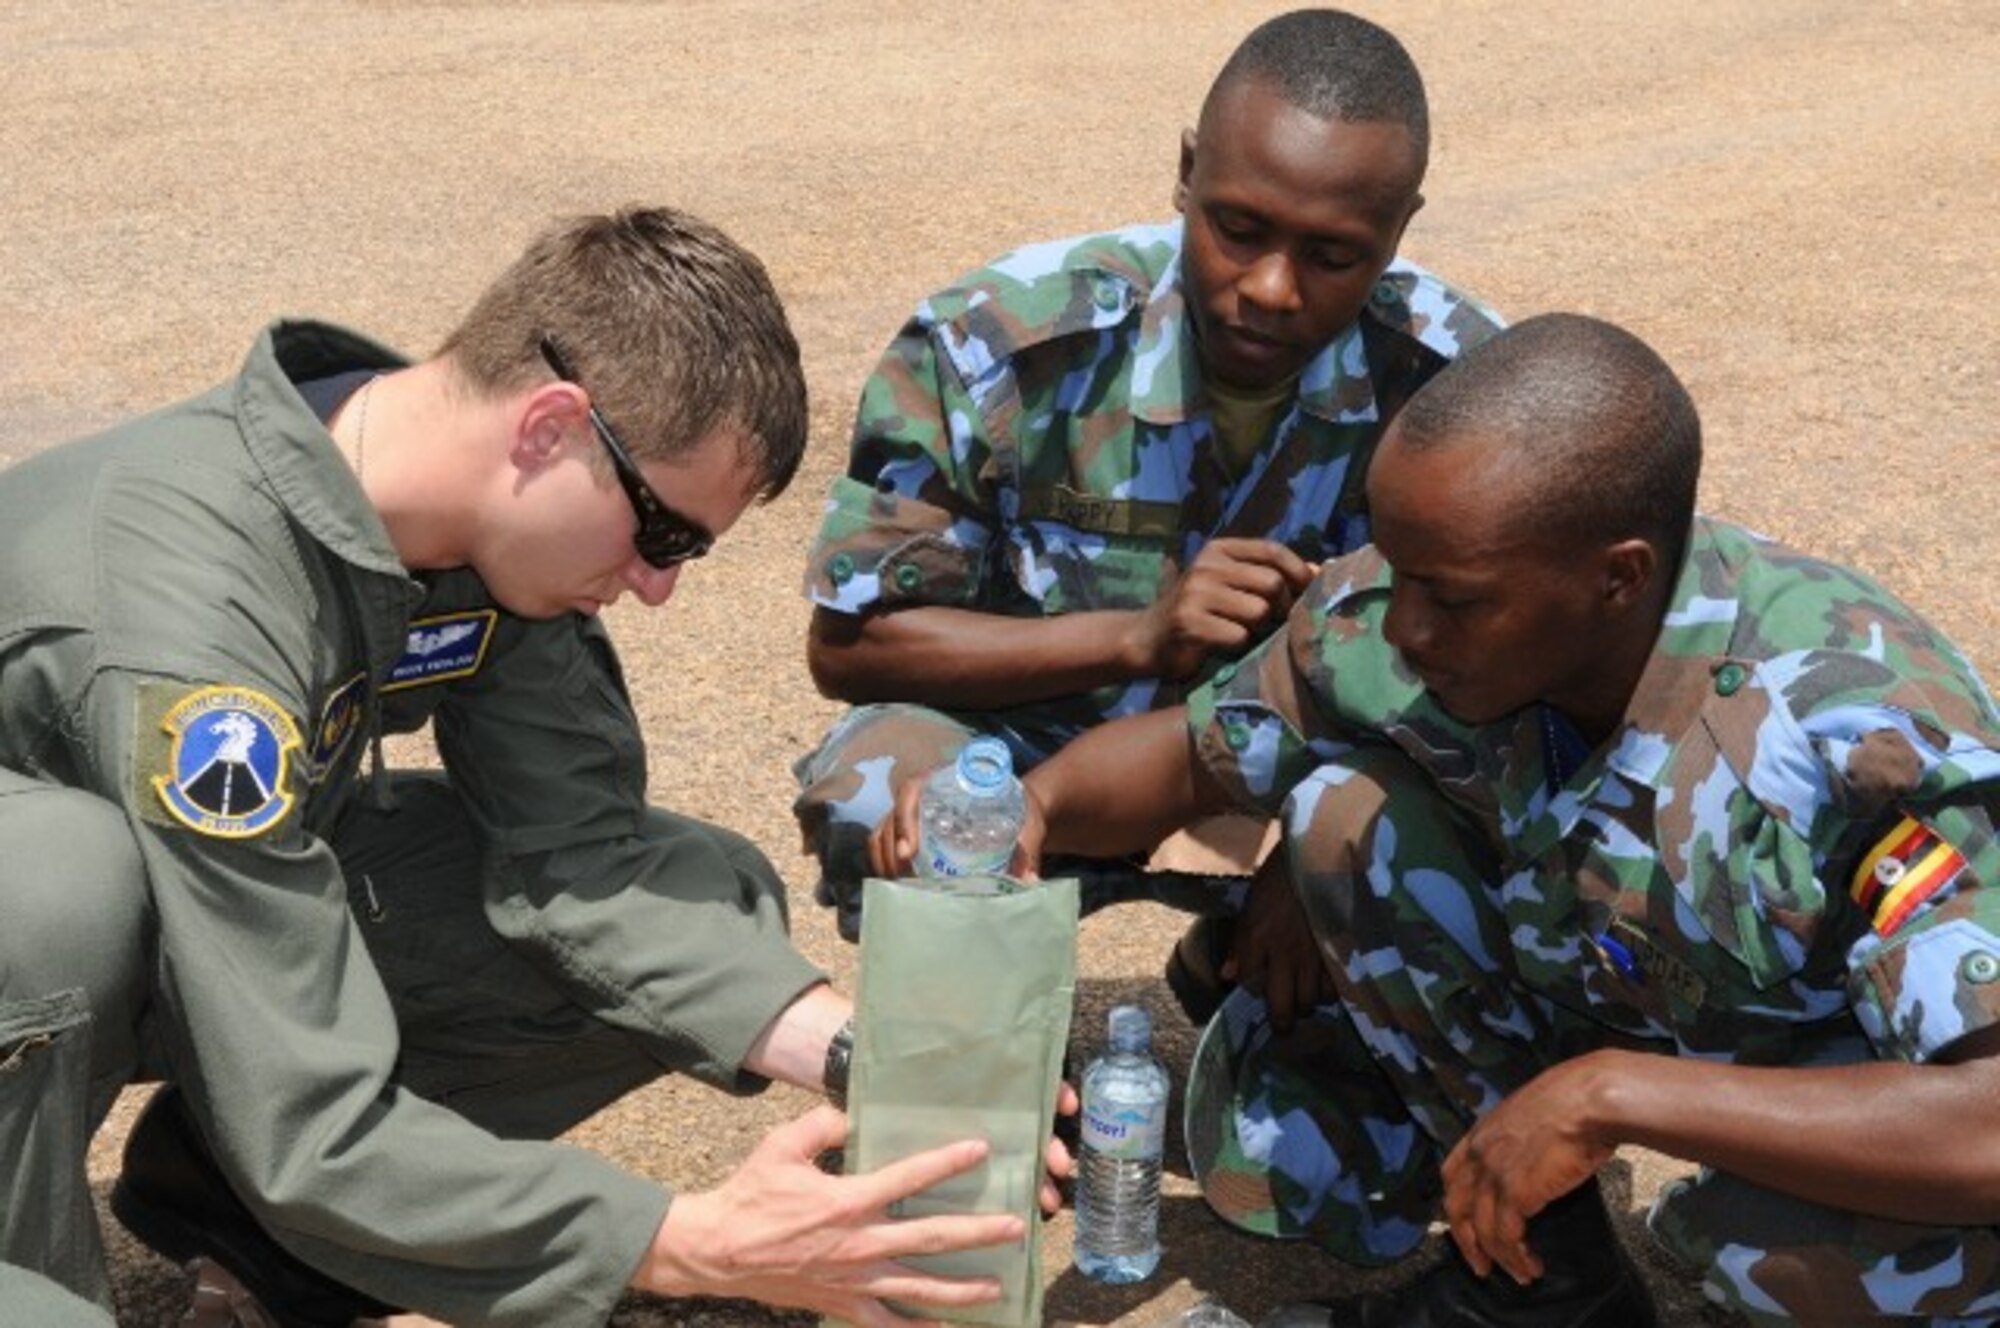 SSgt. Brock Knobloch shows Pvt. Mansur Mupensi (right) and Pvt. Tinkansiimire Happy of the Ugandan People's Defense Air Force how to "cook" a meal-ready-to-eat during a TSC event Aug. 26 in Entebbe, Uganda. (U.S. Air Force photo by Maj. Paula Kurtz.)